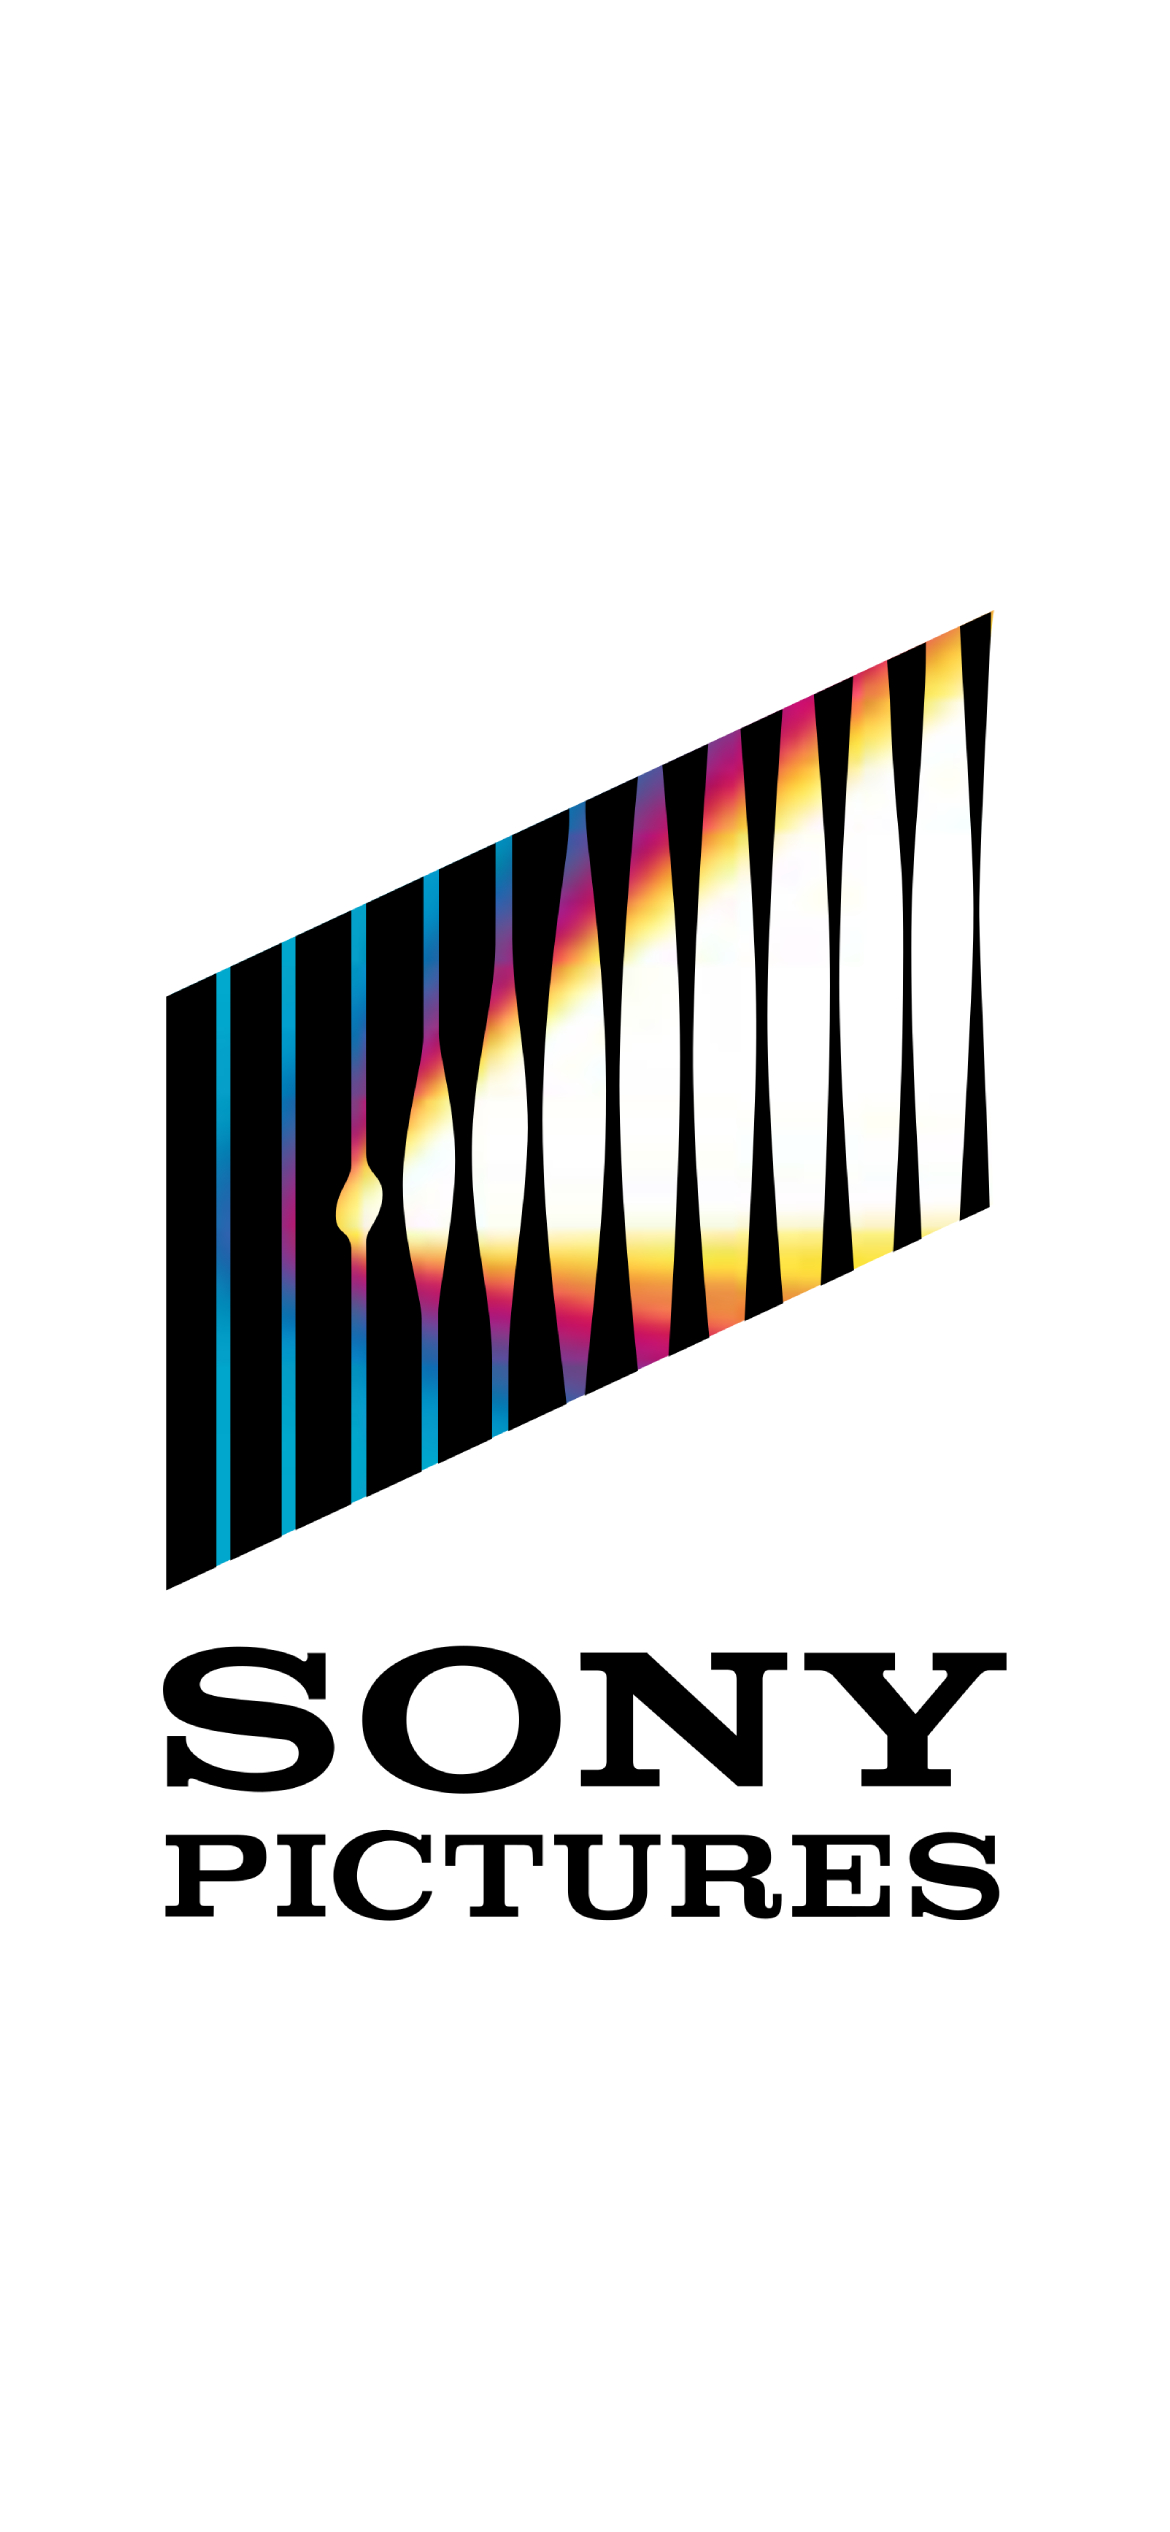 SONY PICTURES iPhone 12 壁紙・待ち受け